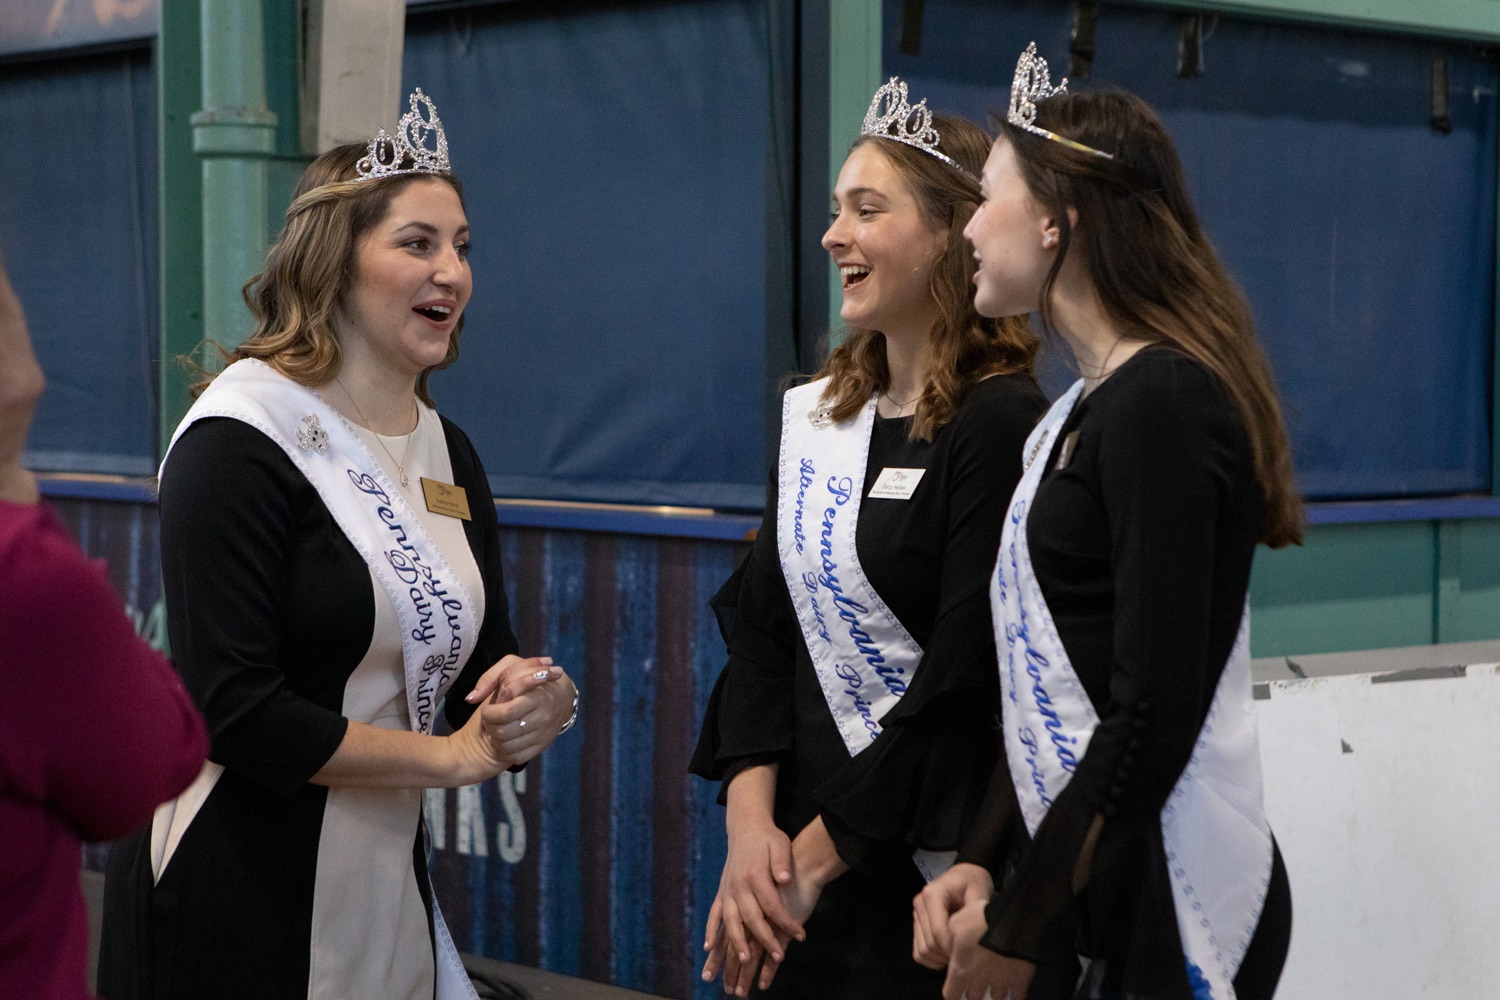 PA Dairy Princesses Selina Horst, Natalie Grumbine, and Darcy Heltzel<br><a href="https://filesource.amperwave.net/commonwealthofpa/photo/22383_Ag_ButterSculpture_ED_28.jpg" target="_blank">⇣ Download Photo</a>